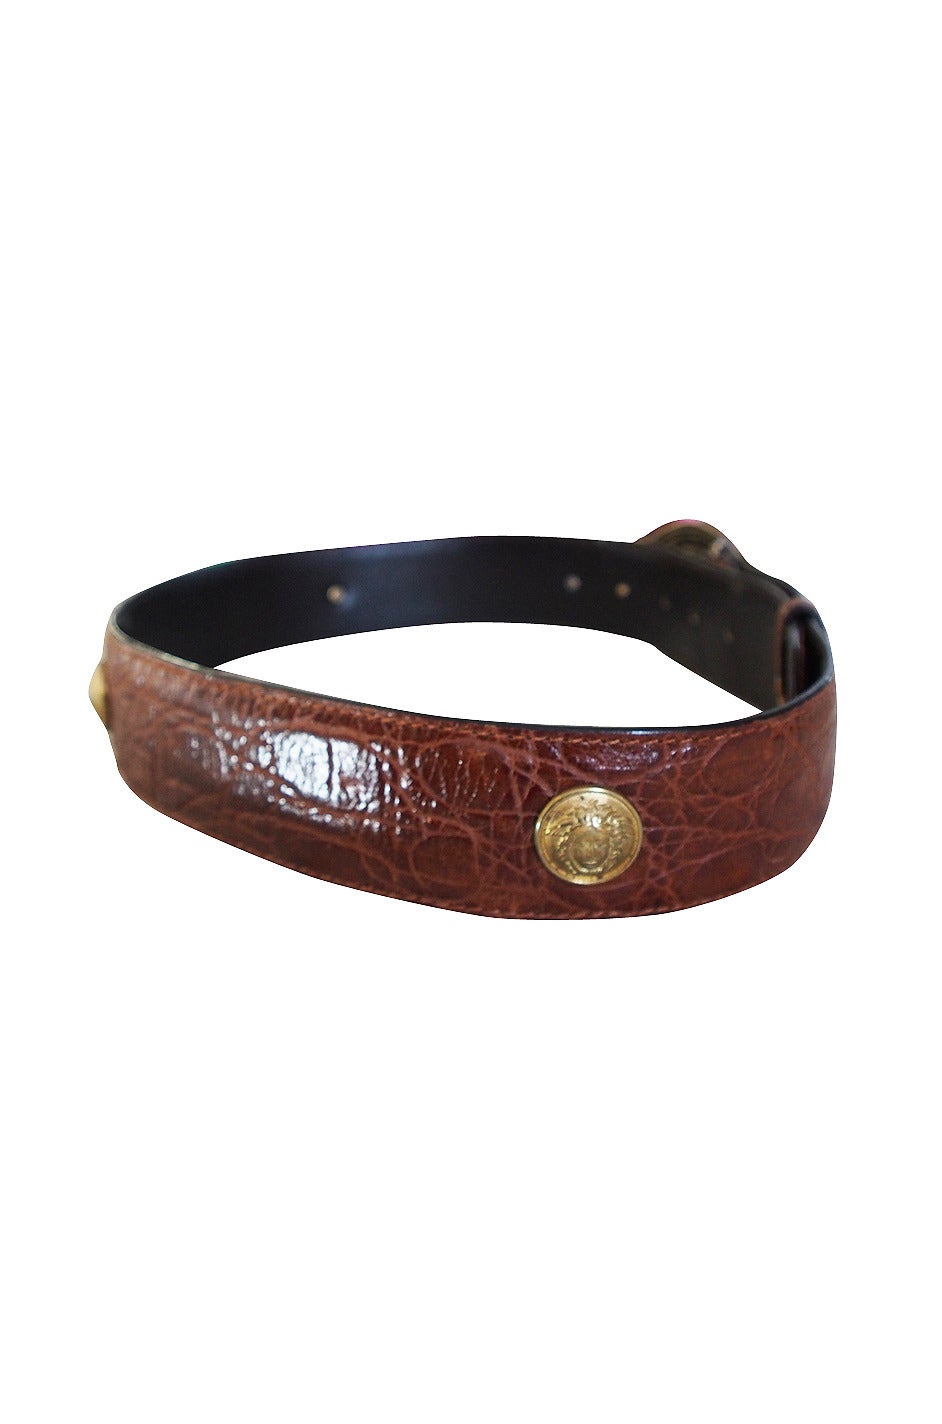 The signature Versace Medusa head adorn the heavy brass buckle and detailing on the belt at the front and also appear around the belt on the large studs. A stunning exotic skin that shows no soigns of wear or dryness. A classic and I love the width